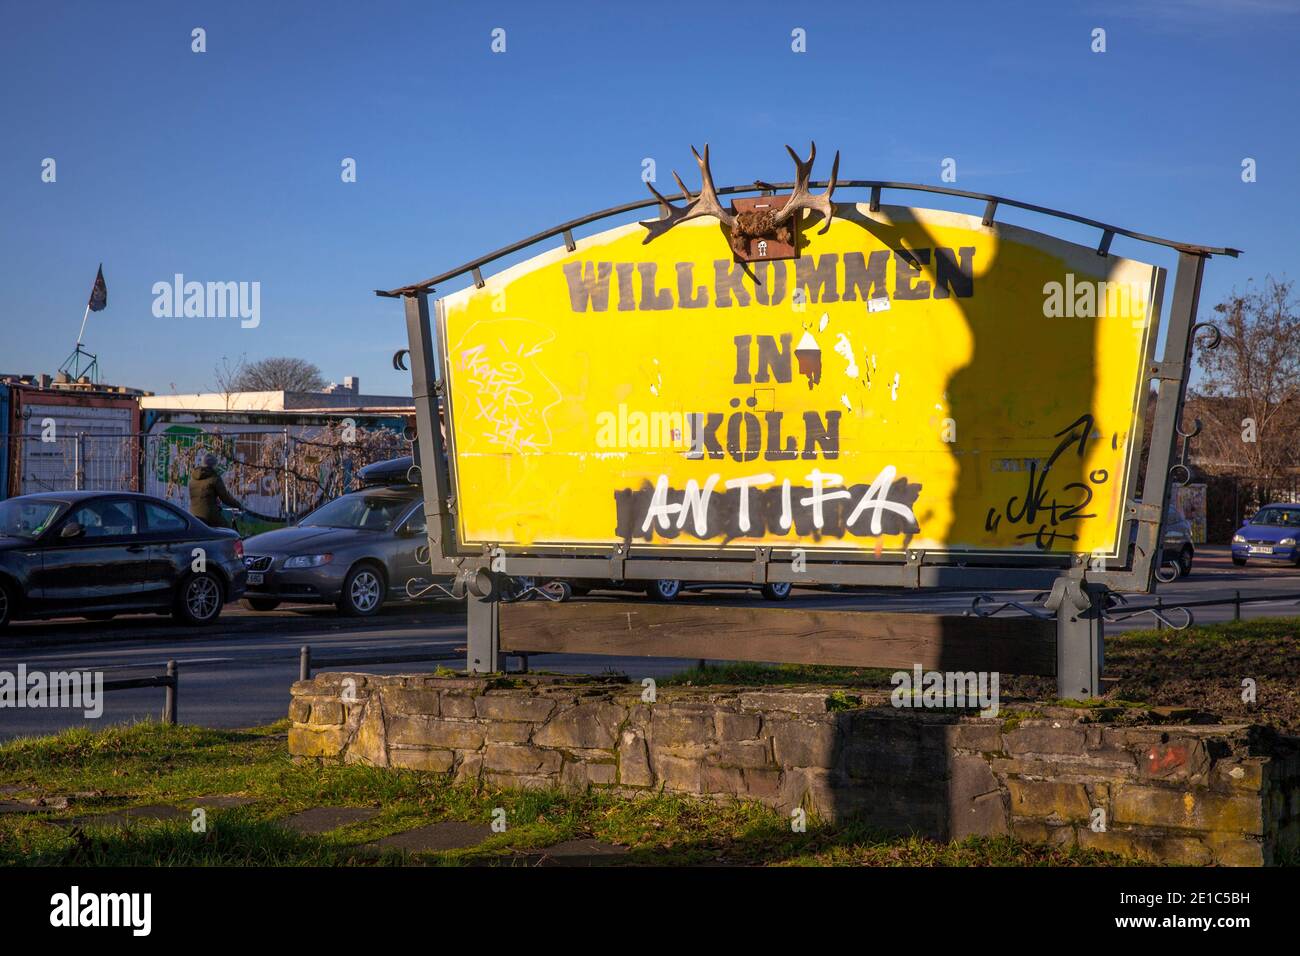 the sign of a former inn was transformed into an unusal town entrance sign with antlers, translation: Welcome to Cologne, Alteburger Strasse, Cologne, Stock Photo